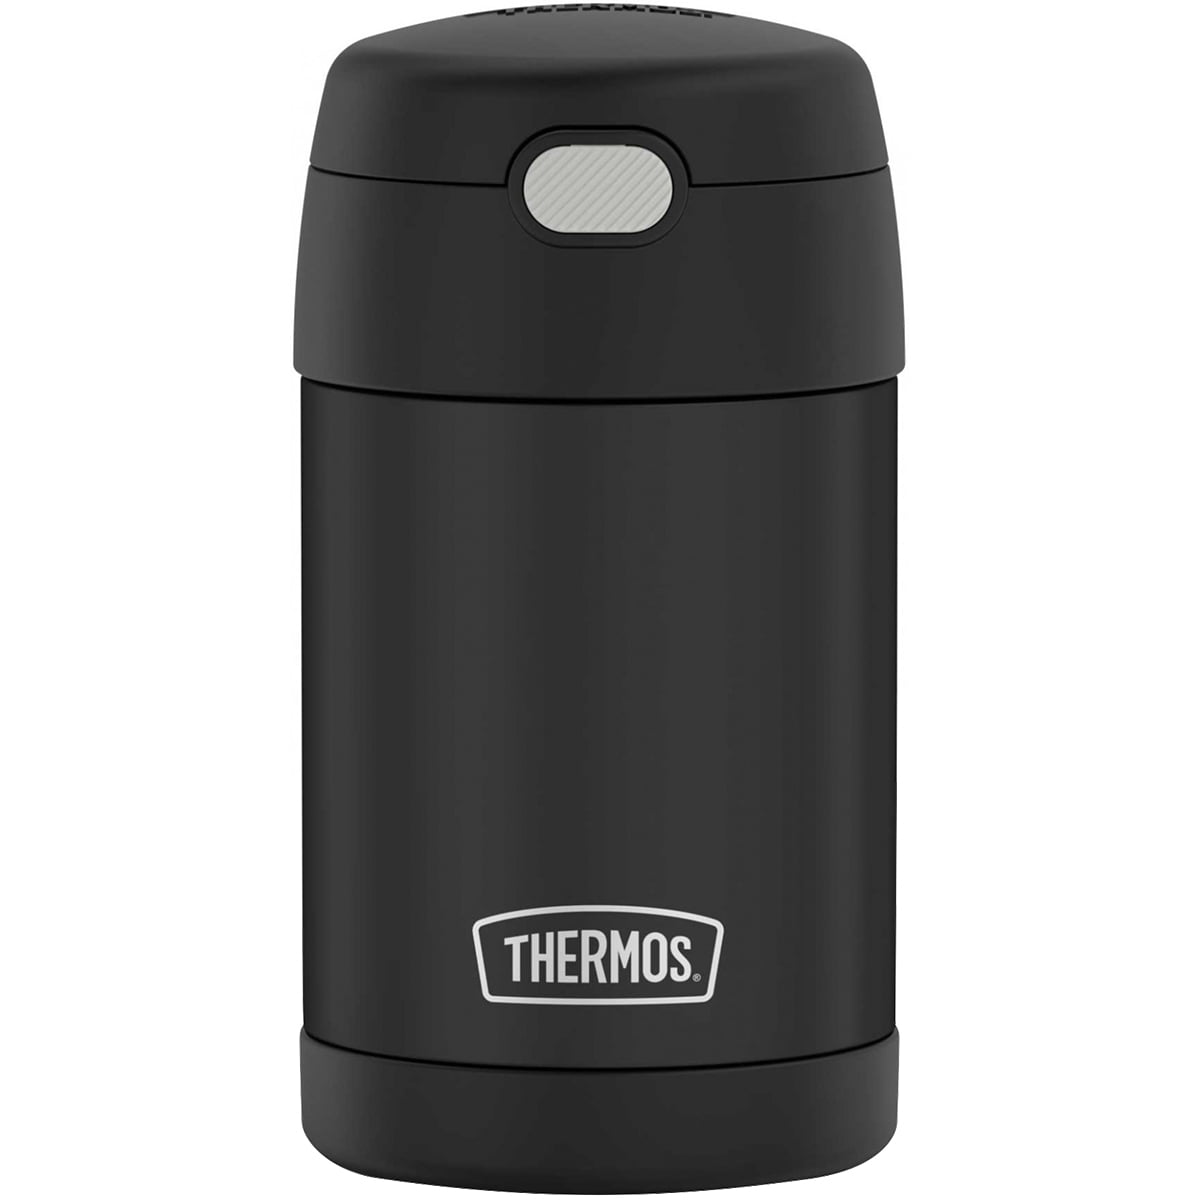 Thermos Funtainer 16 oz Stainless Steel Vacuum Insulated Food Jar with Folding Spoon - Black Matte